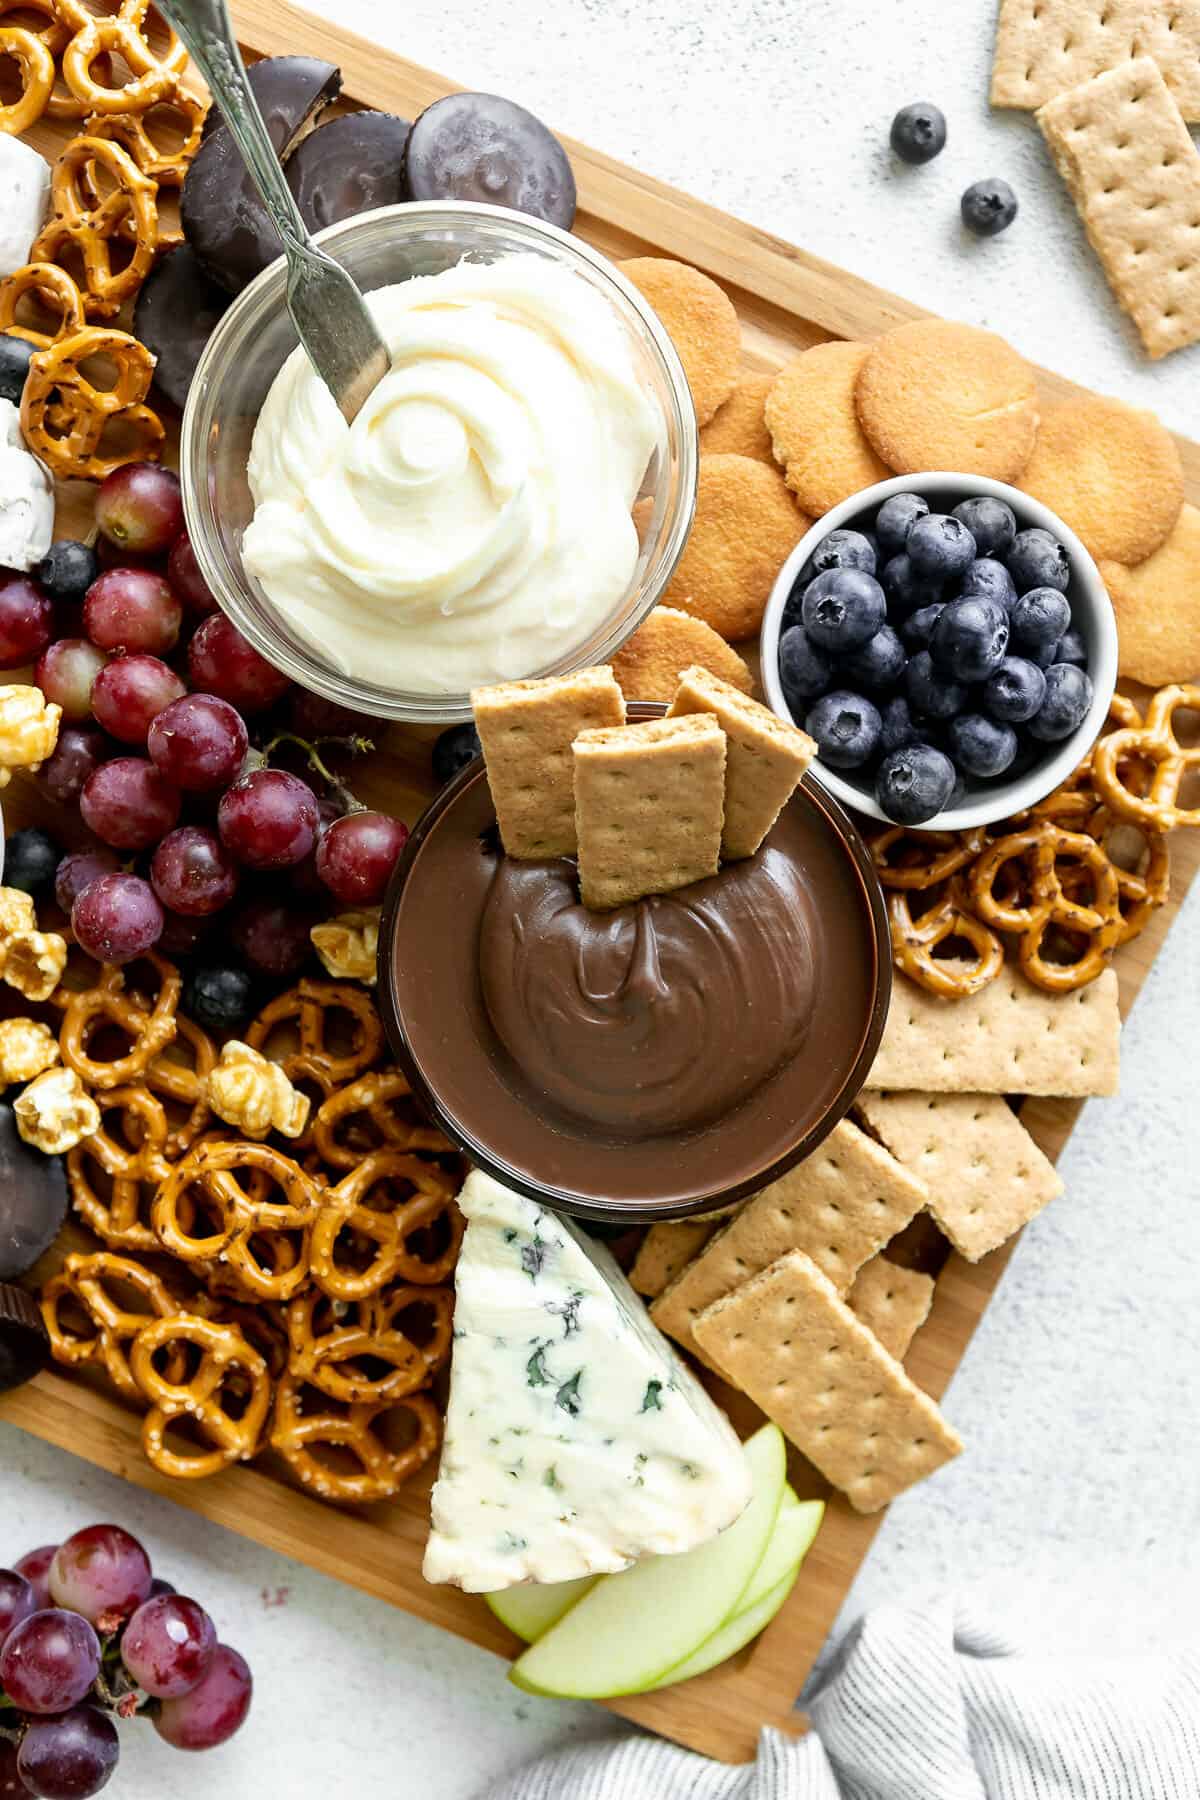 Large dessert charcuterie board filled with fruit, nuts, dips, and candy.